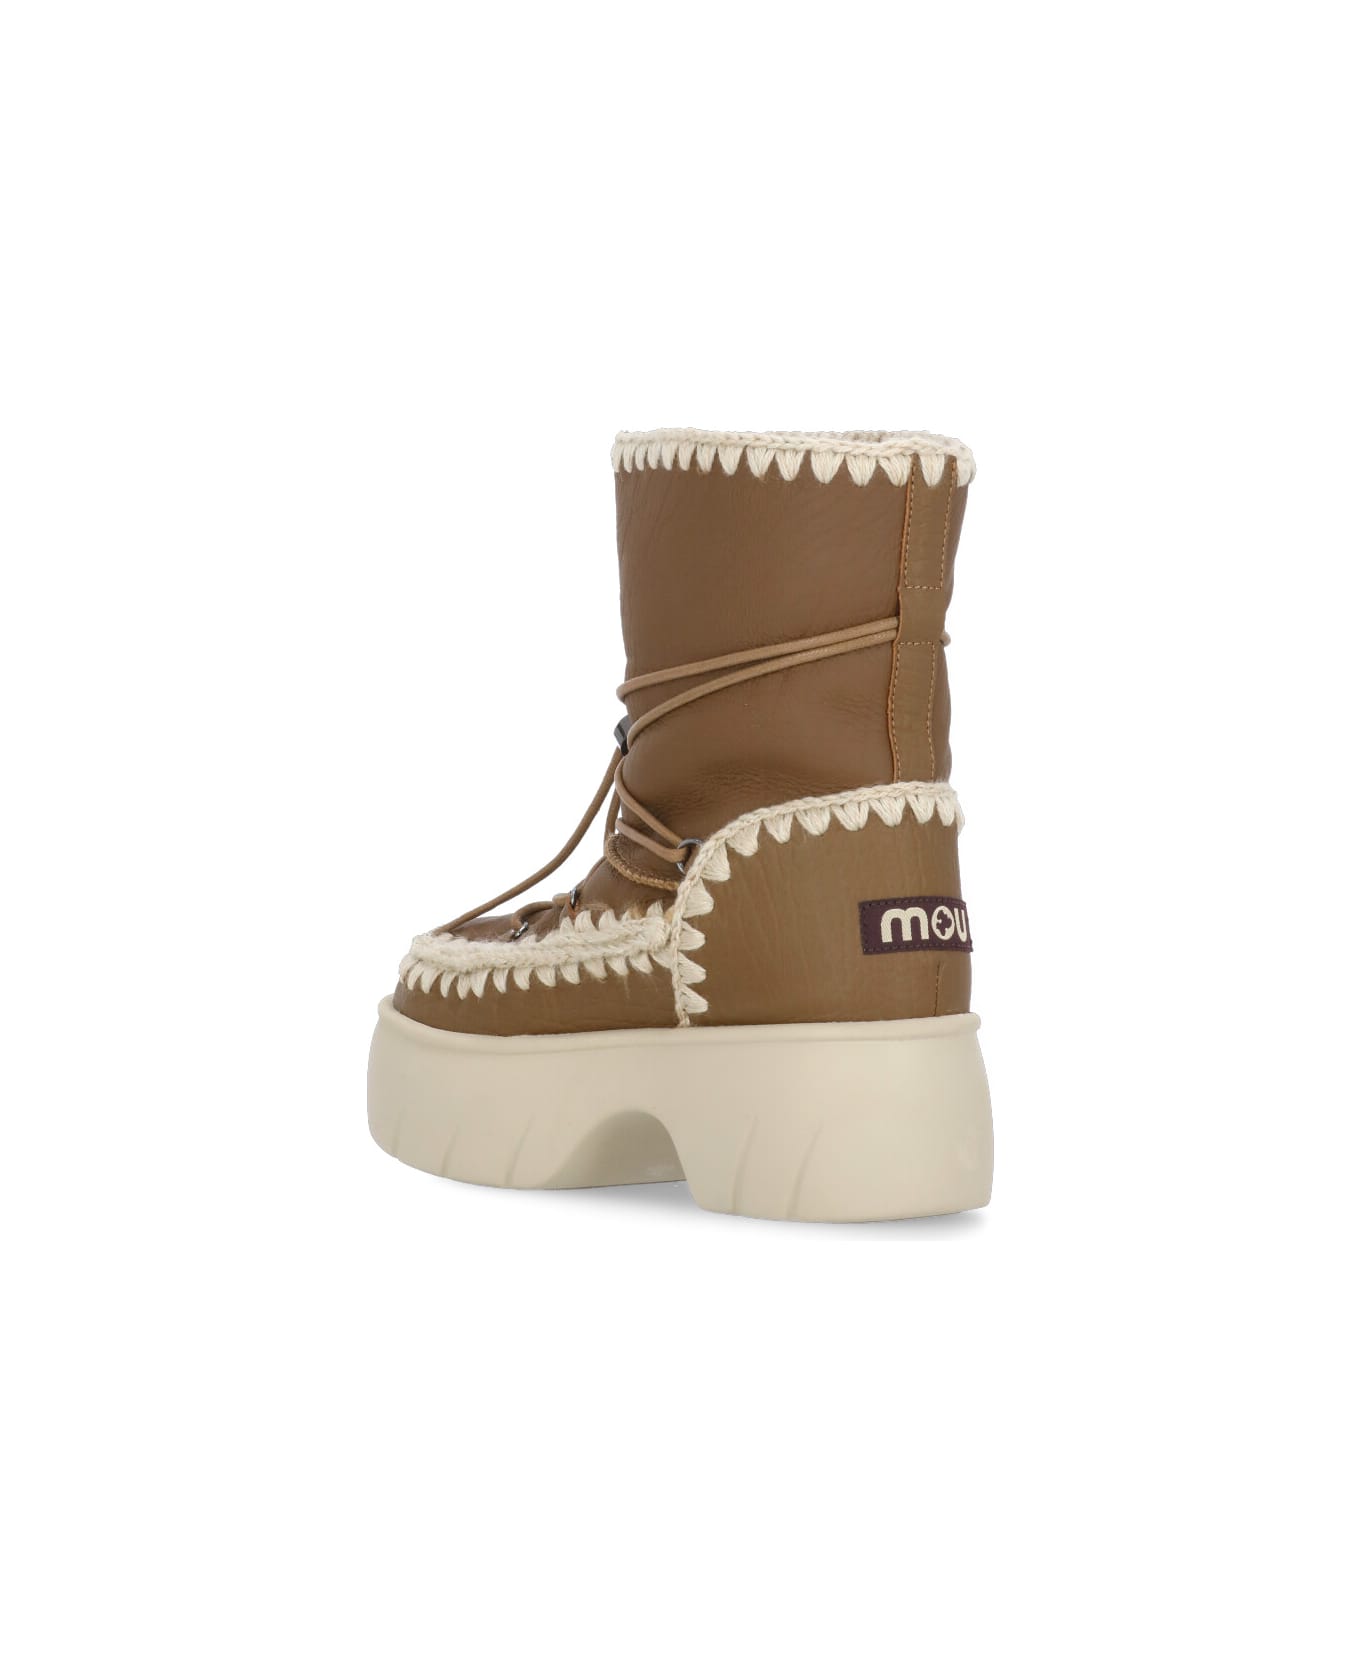 Mou Eskimo Twist Short Ankle Boots - Brown ブーツ